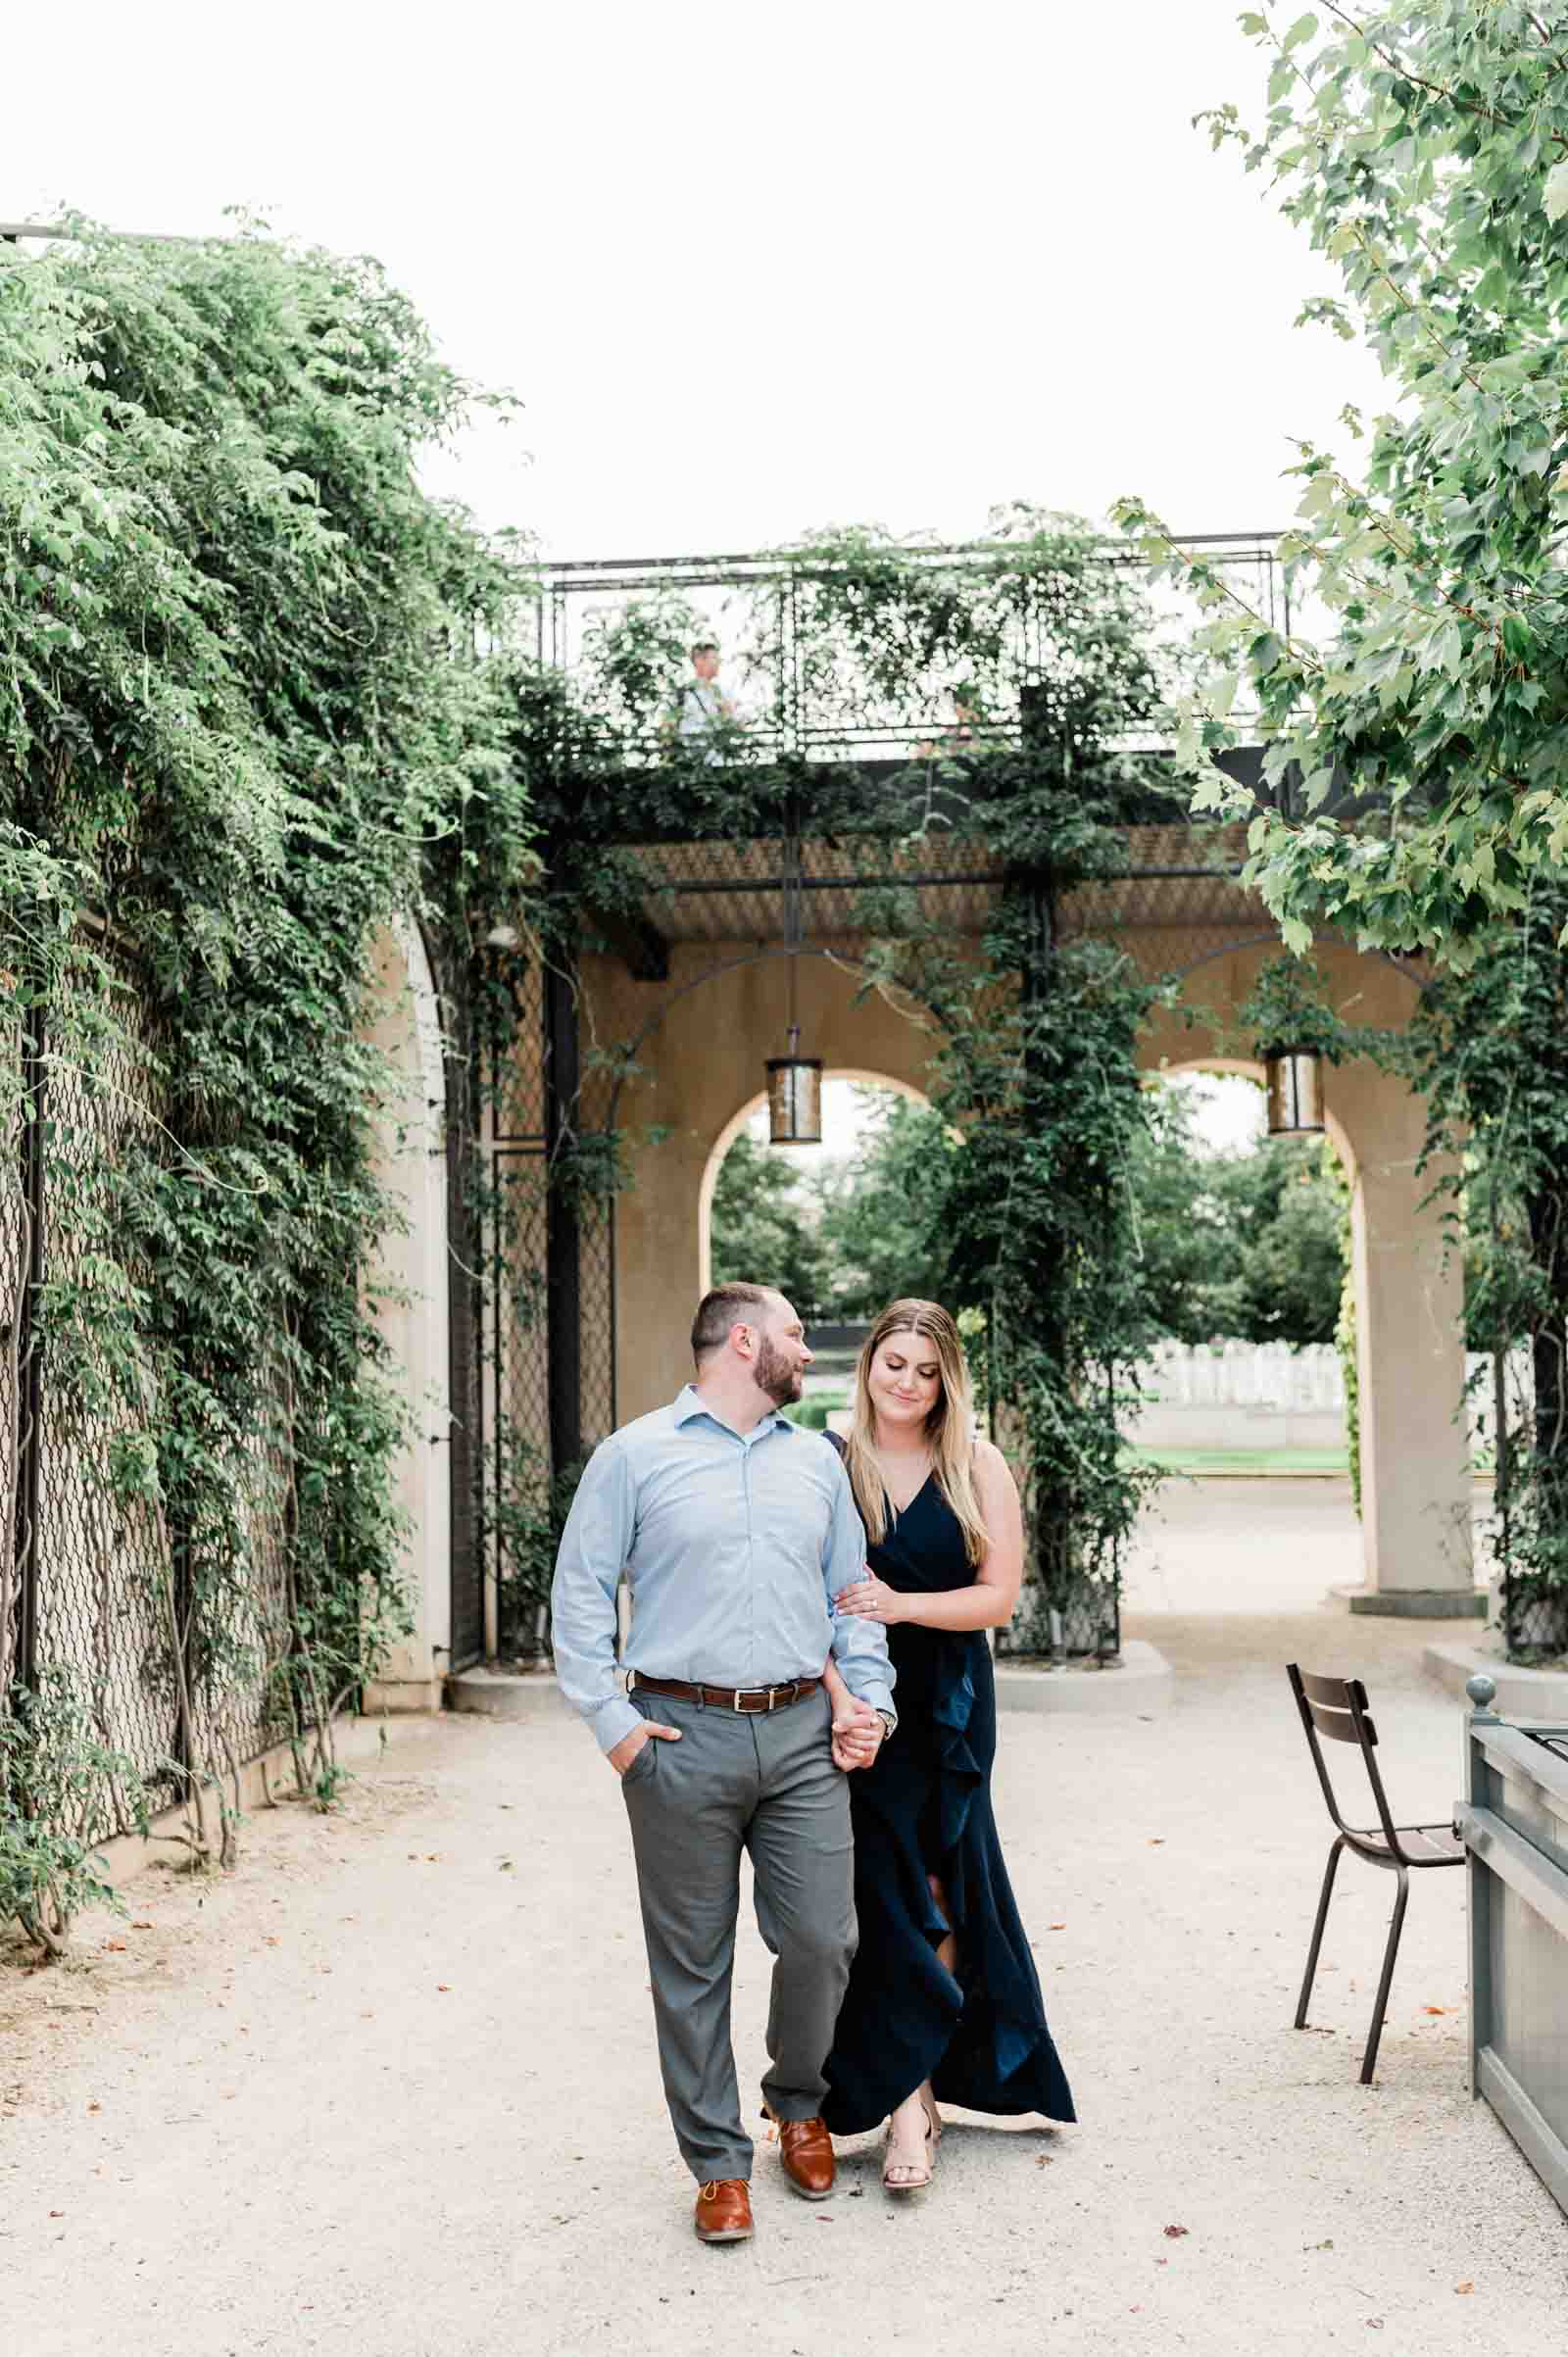 Romantic couple embracing amidst blooming flowers at Longwood Gardens, Philadelphia, Pennsylvania - Editorial Engagement Session